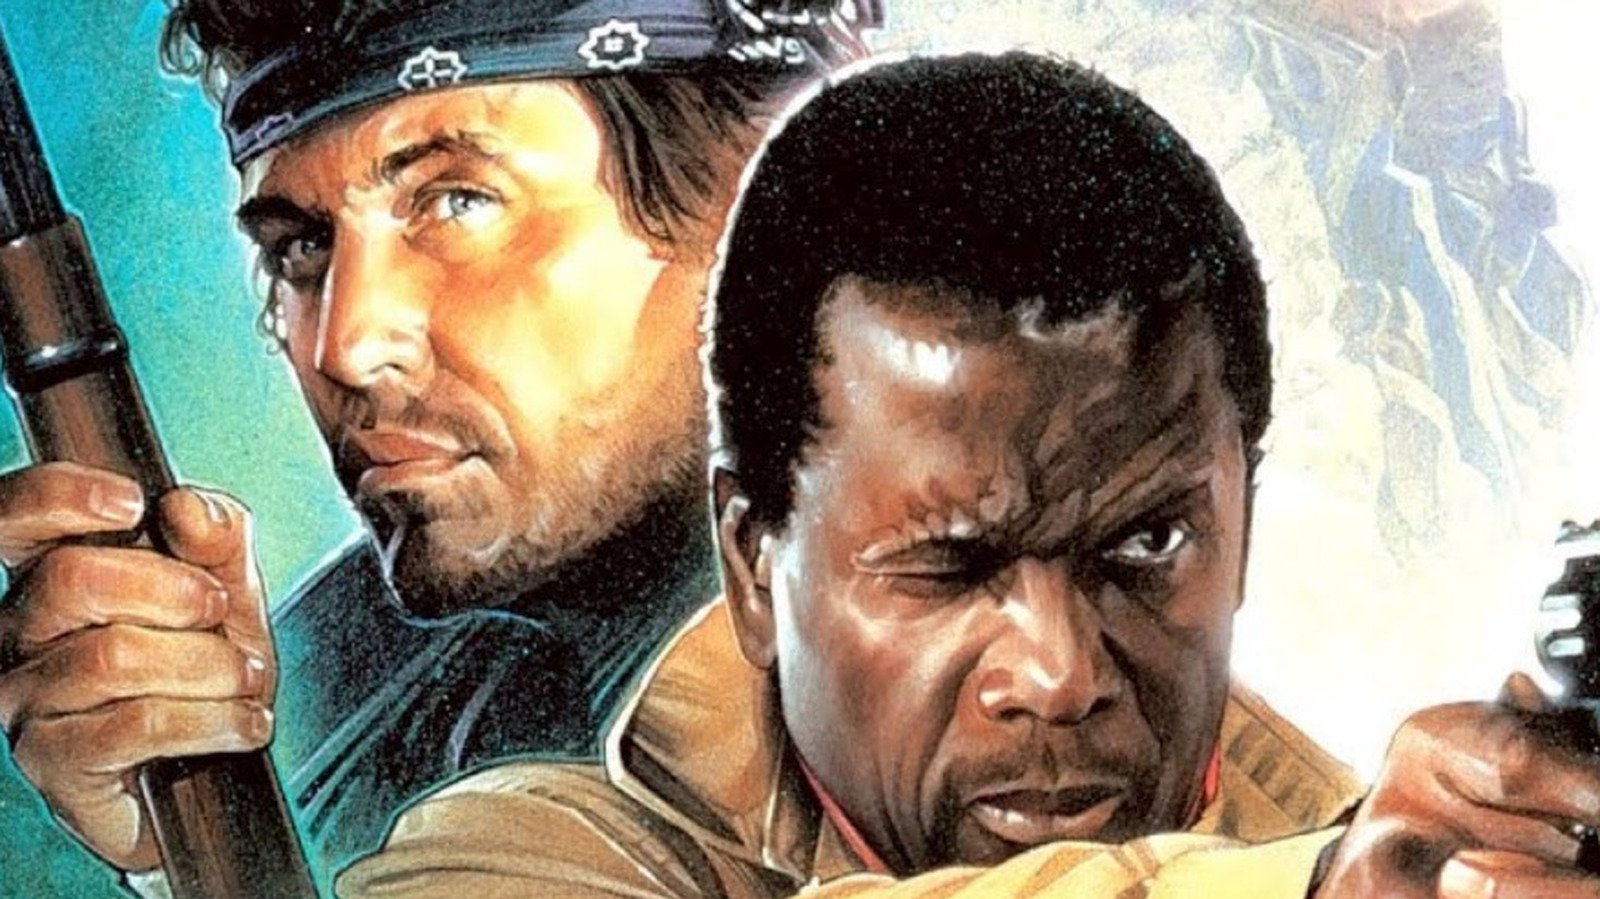 17 '80s Action Movies You Definitely Need To See